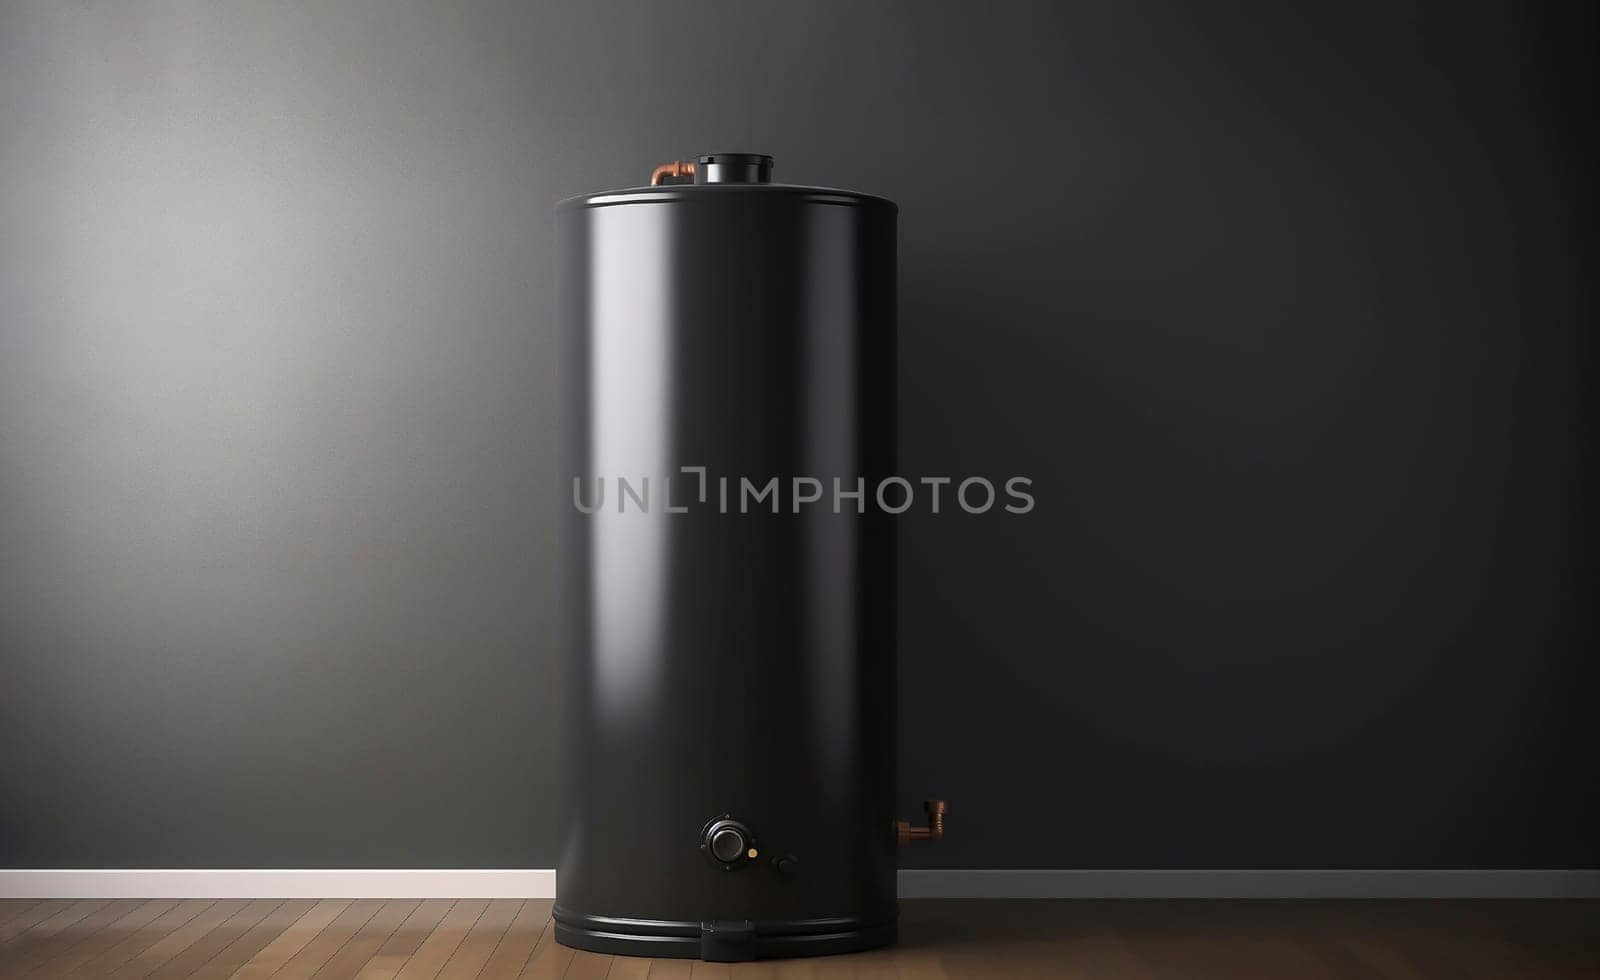 Black Water Heater Tank With Water Temperature Control, Electric Boiler in Modern Boiler Room with Gray Walls and Wooden Floor. Horizontal Plane. Space For Text, AI Generated by netatsi